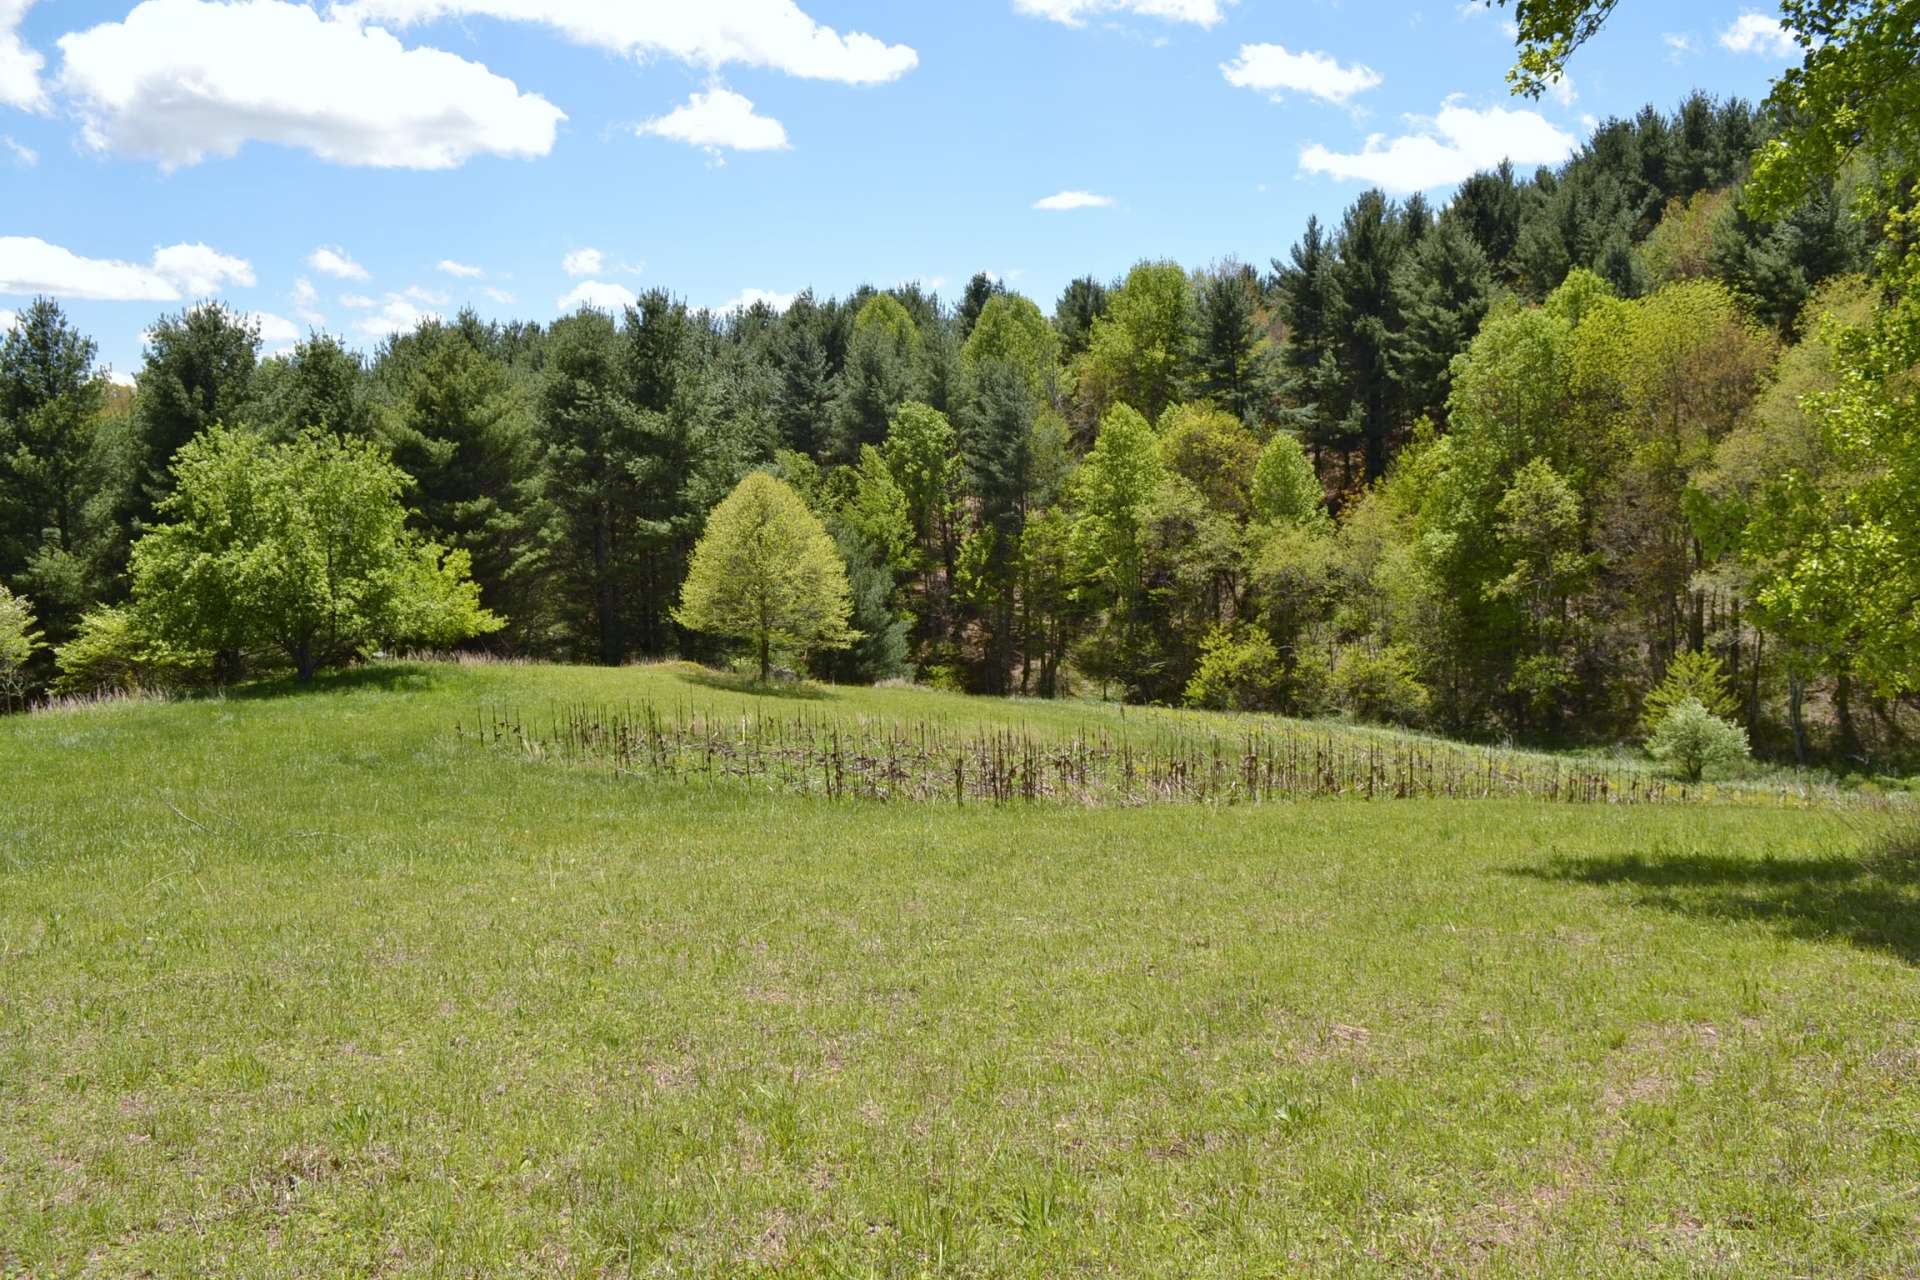 The current owner has planted corn patches and feeding plots for the deer habitat.